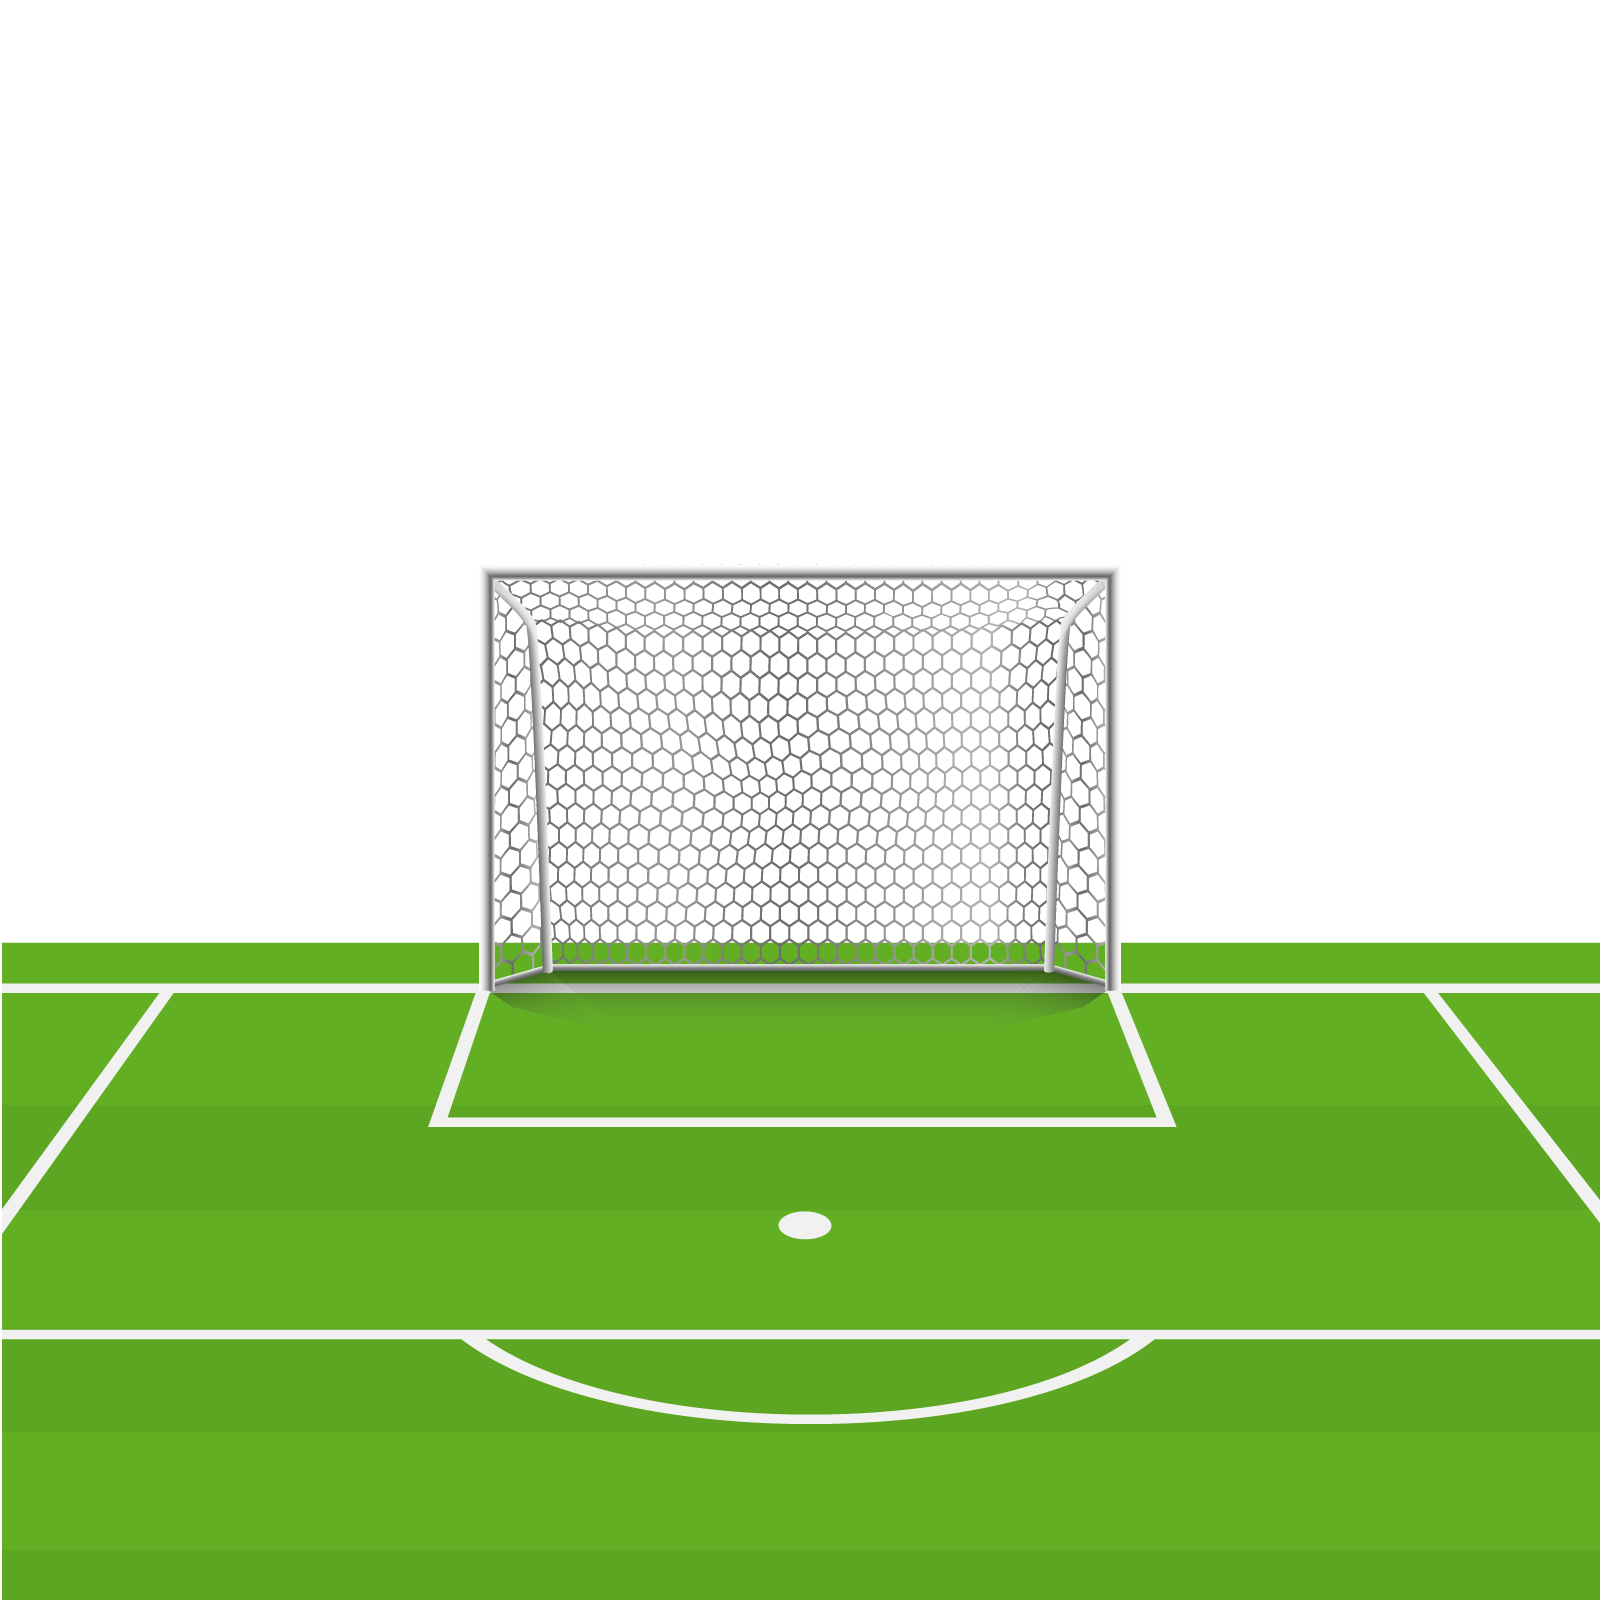 Goal Png Images Football Goal Clipart Pictures Free Transparent Png Logos